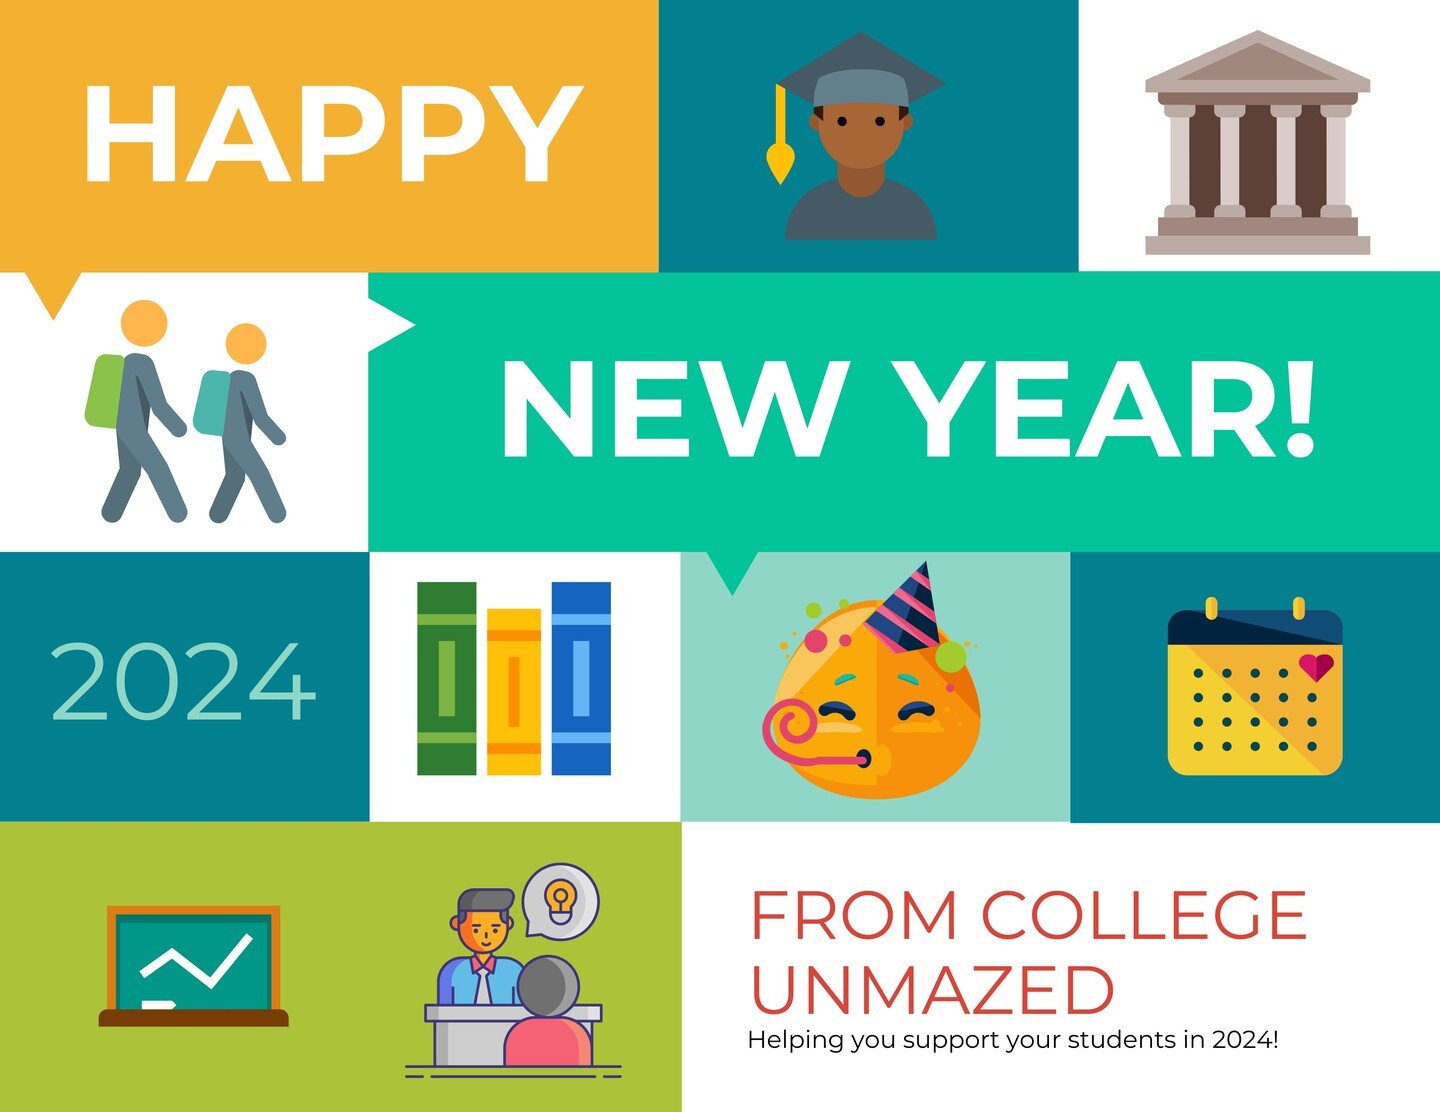 Happy New Year! College UnMazed wishes you the very best for 2024!
Whether you are a family starting the high school to college process or a school counselor/educator who wishes to better support your students by building key college and career readi